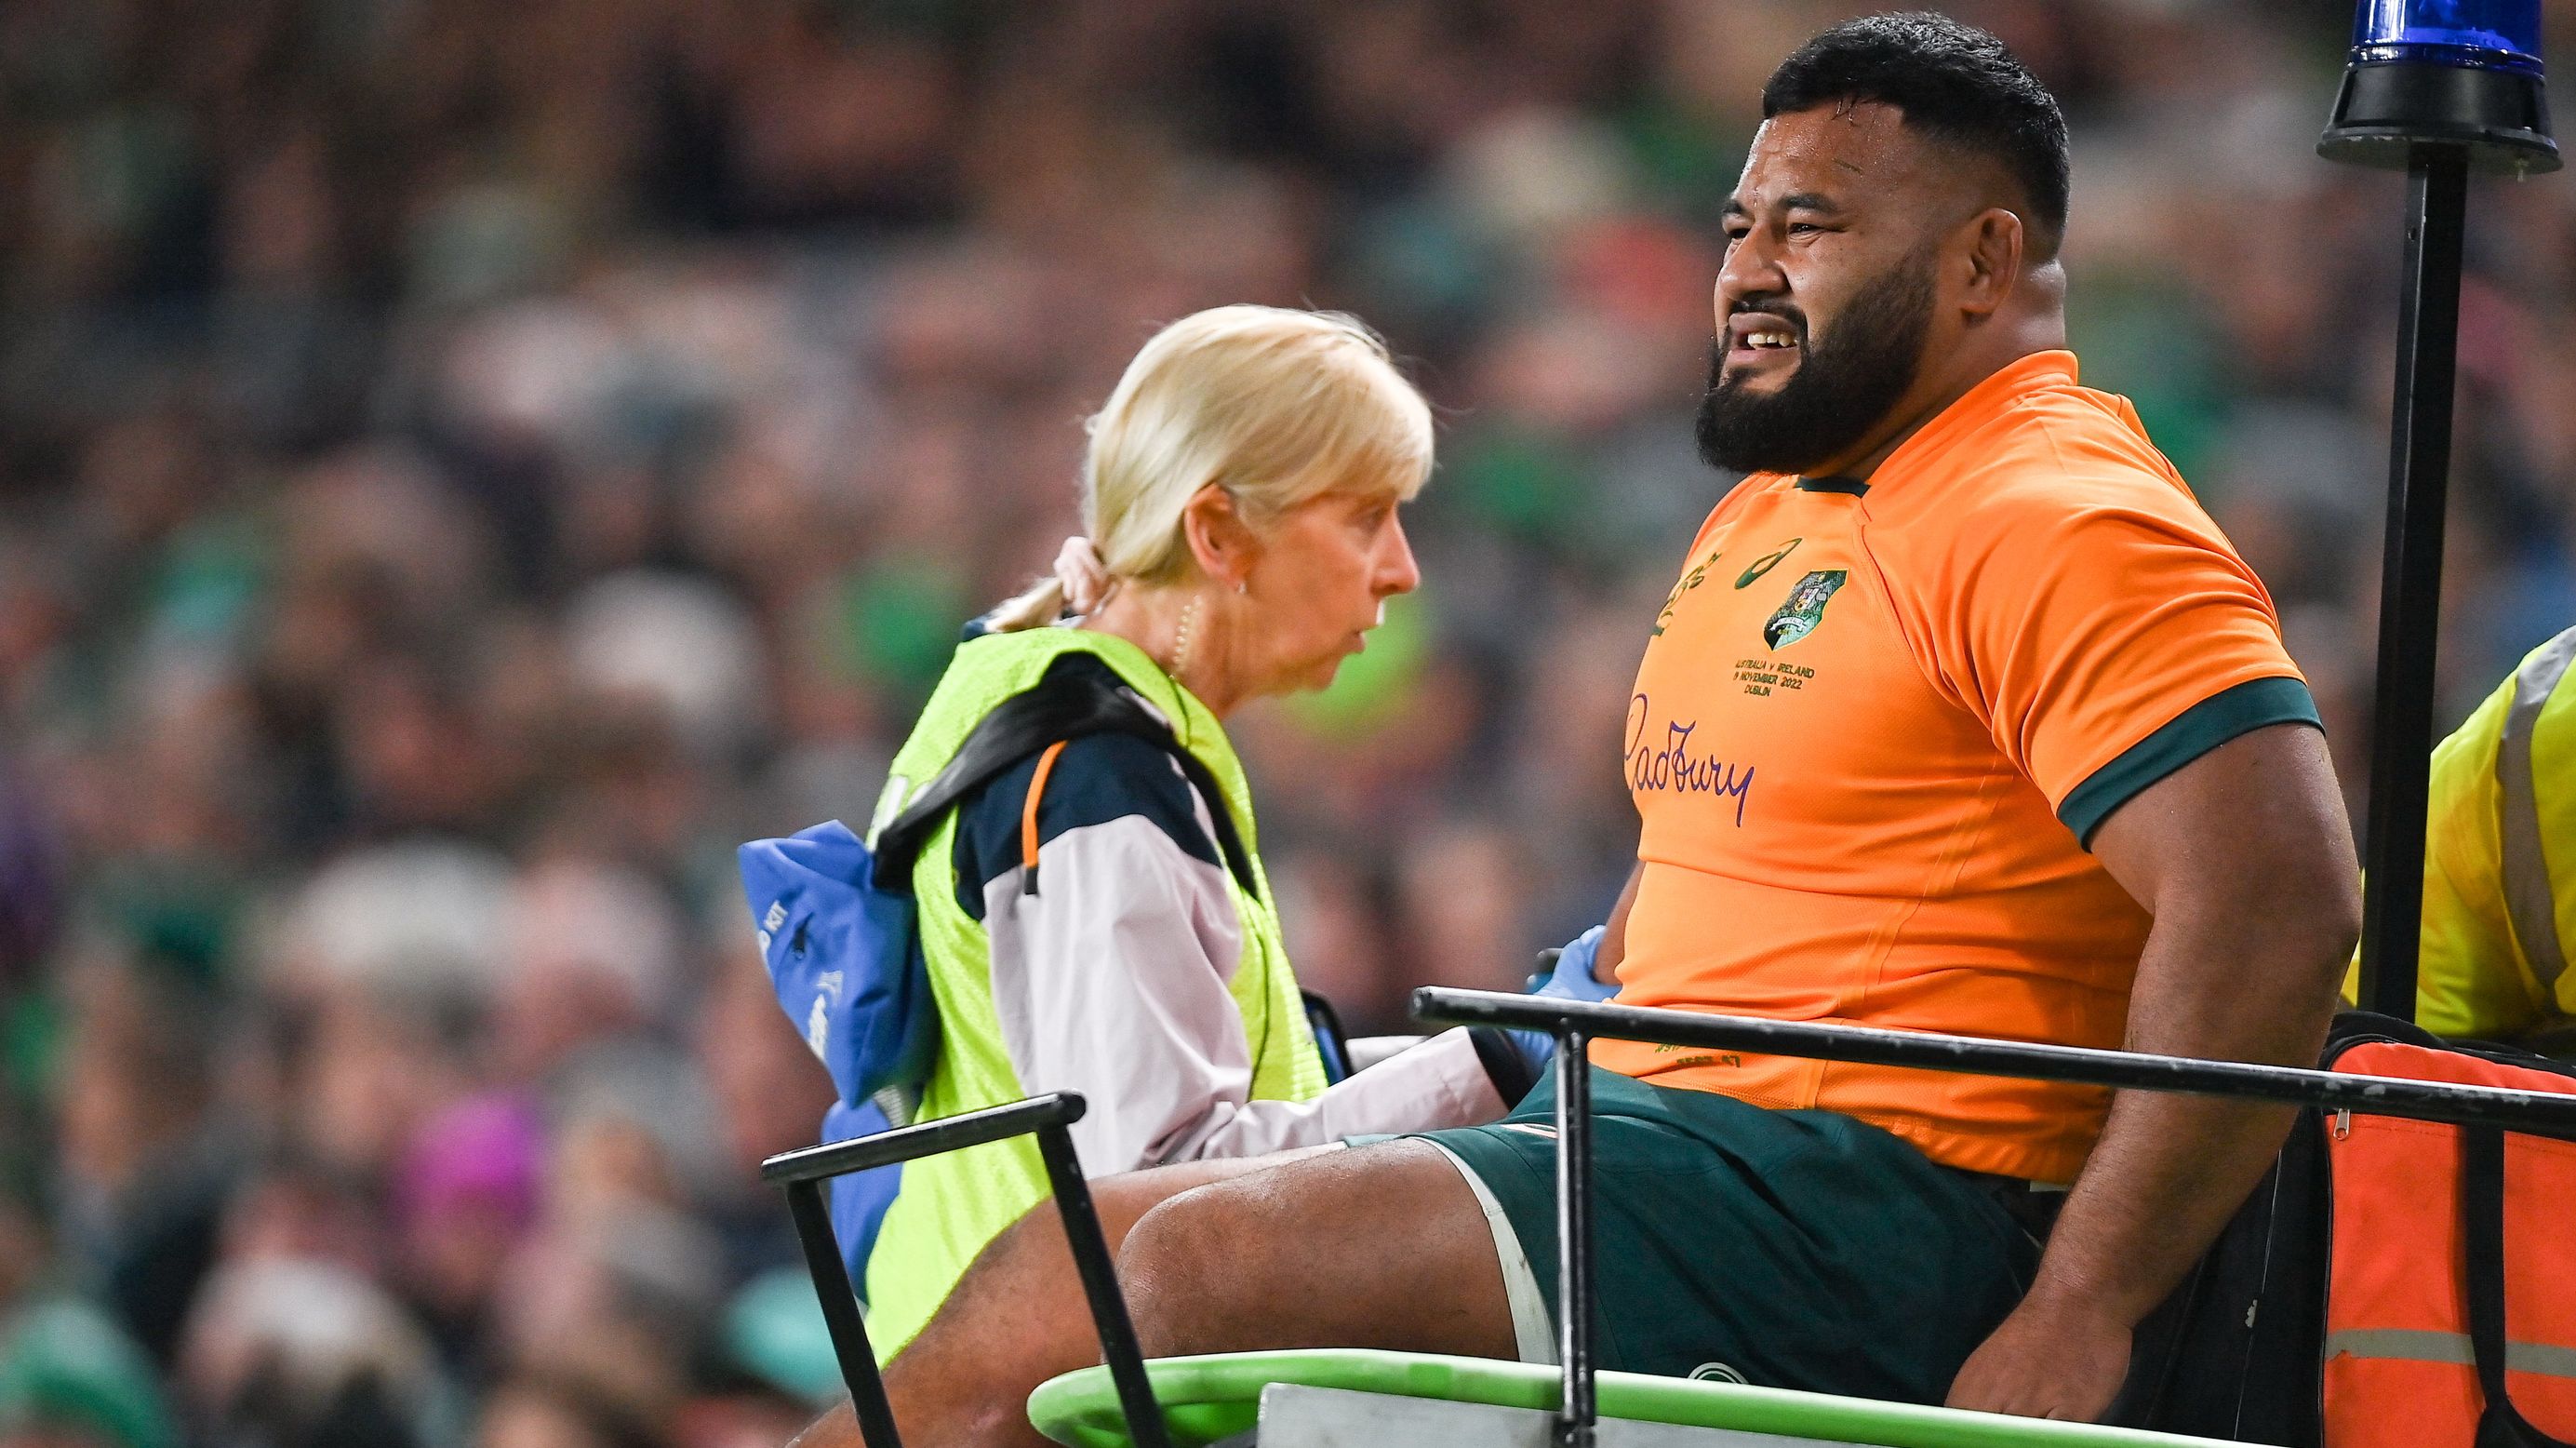 Taniela Tupou of Australia is taken from the pitch to receive medial attention.